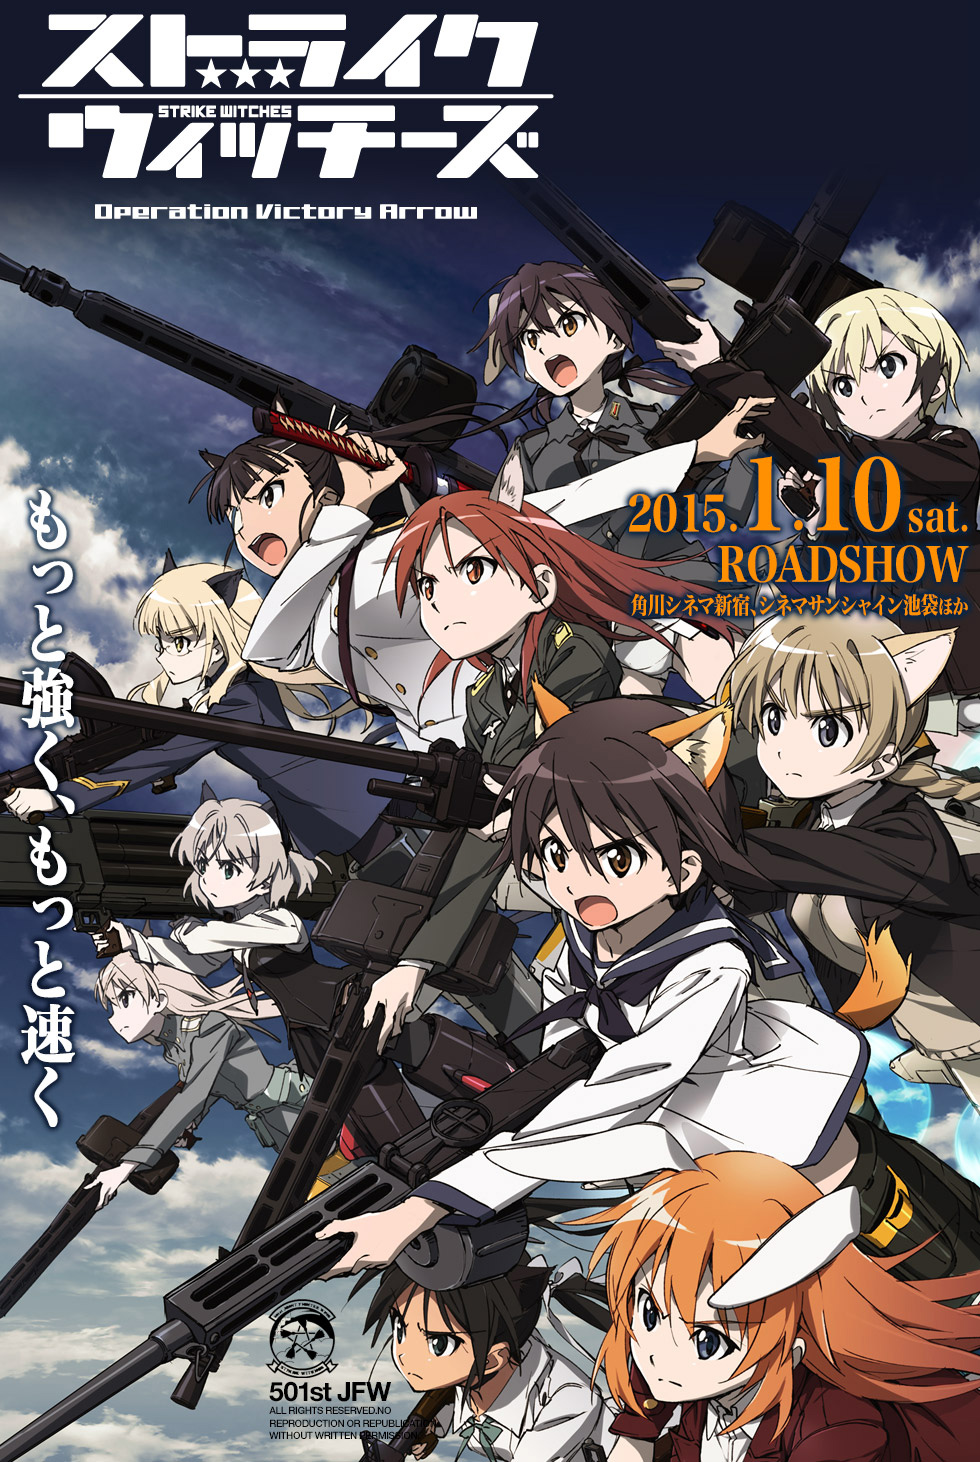 Strike-Witches-Victory-Arrow-Vol-2-Visual